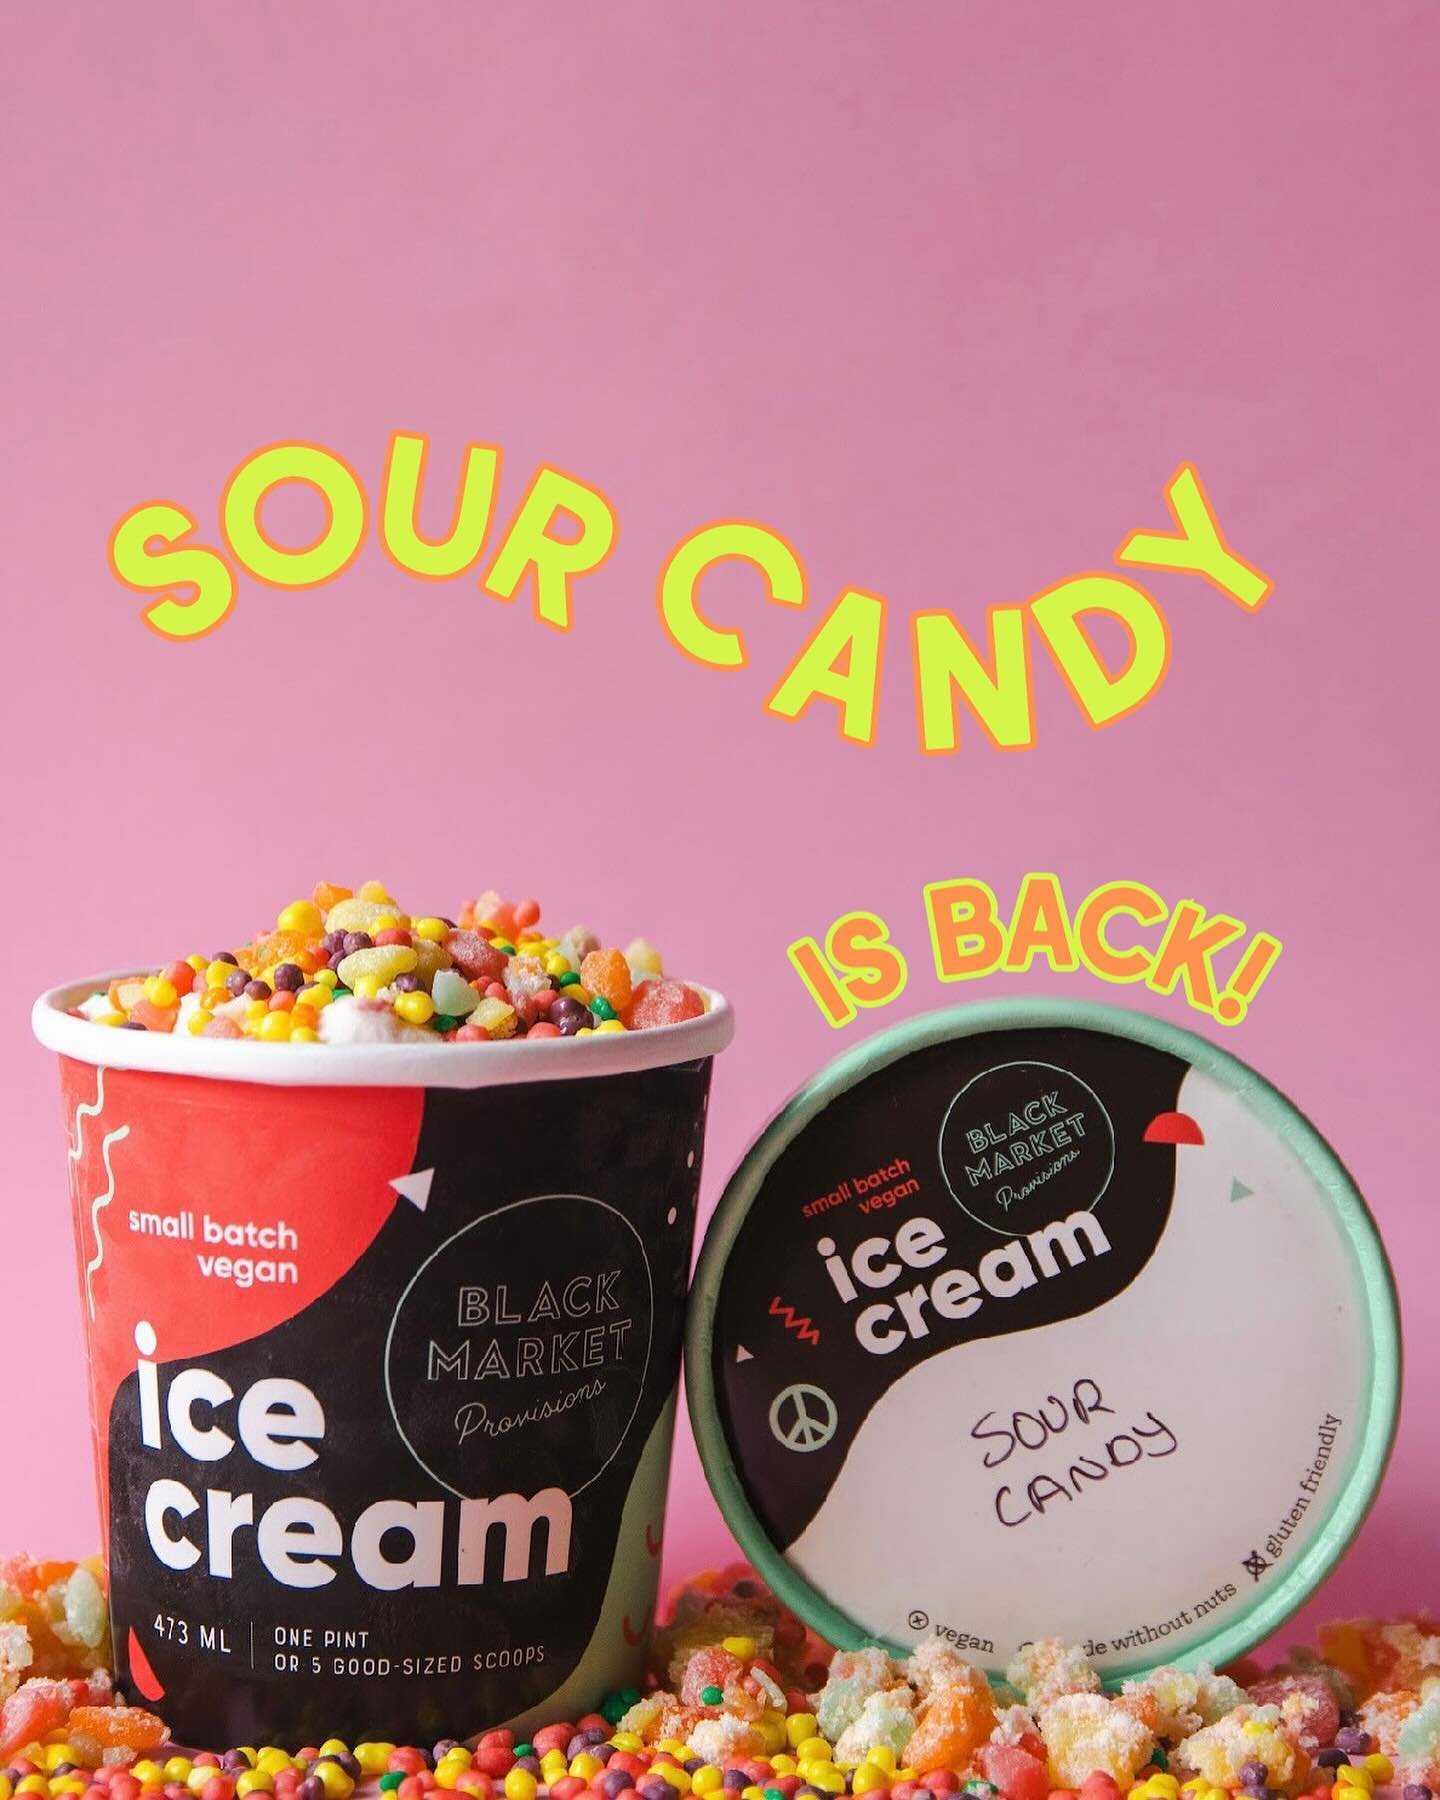 💚🍭✨🍬⚡️🍭💥🍬💚
SOUR CANDY ICE CREAM IS BACK!
You voted for this one to come back from the retired flave archives and we gotta say, we&rsquo;re happy you did!

This one has tart + fruity ice cream and layers of crumbled up sour candy, and the contr